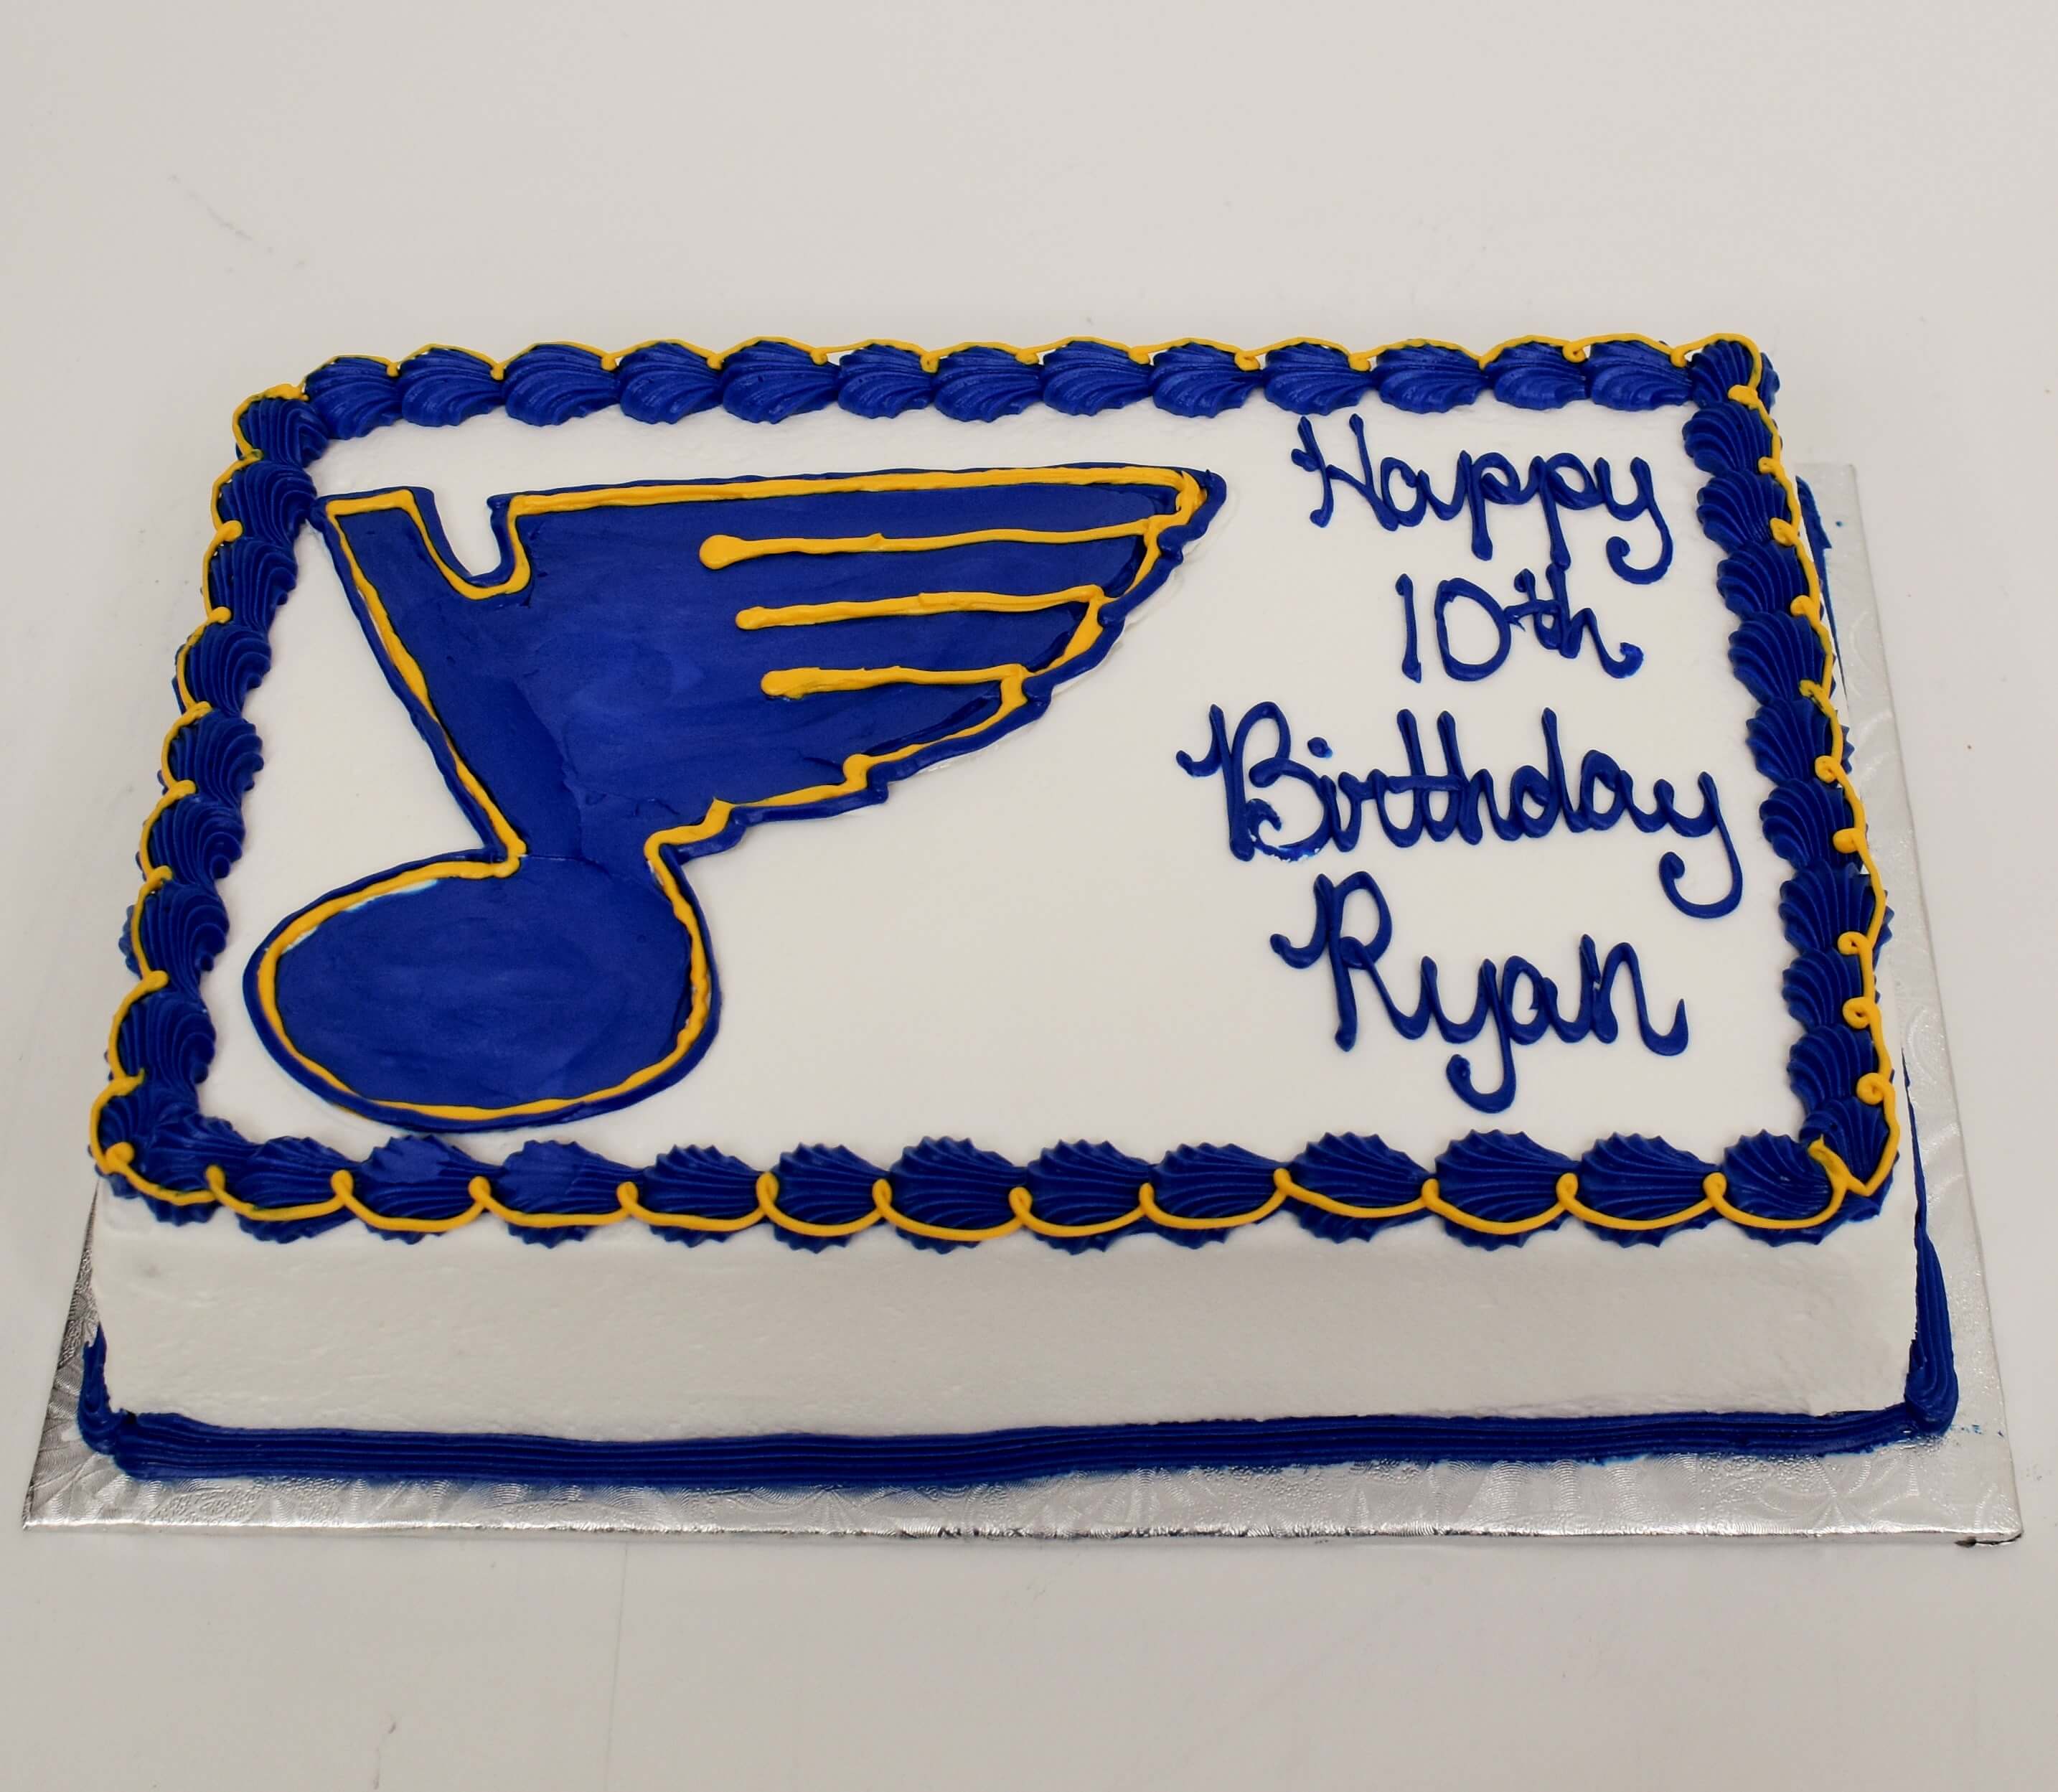 McArthur's Bakery Custom Cake with St Louis Blues Note